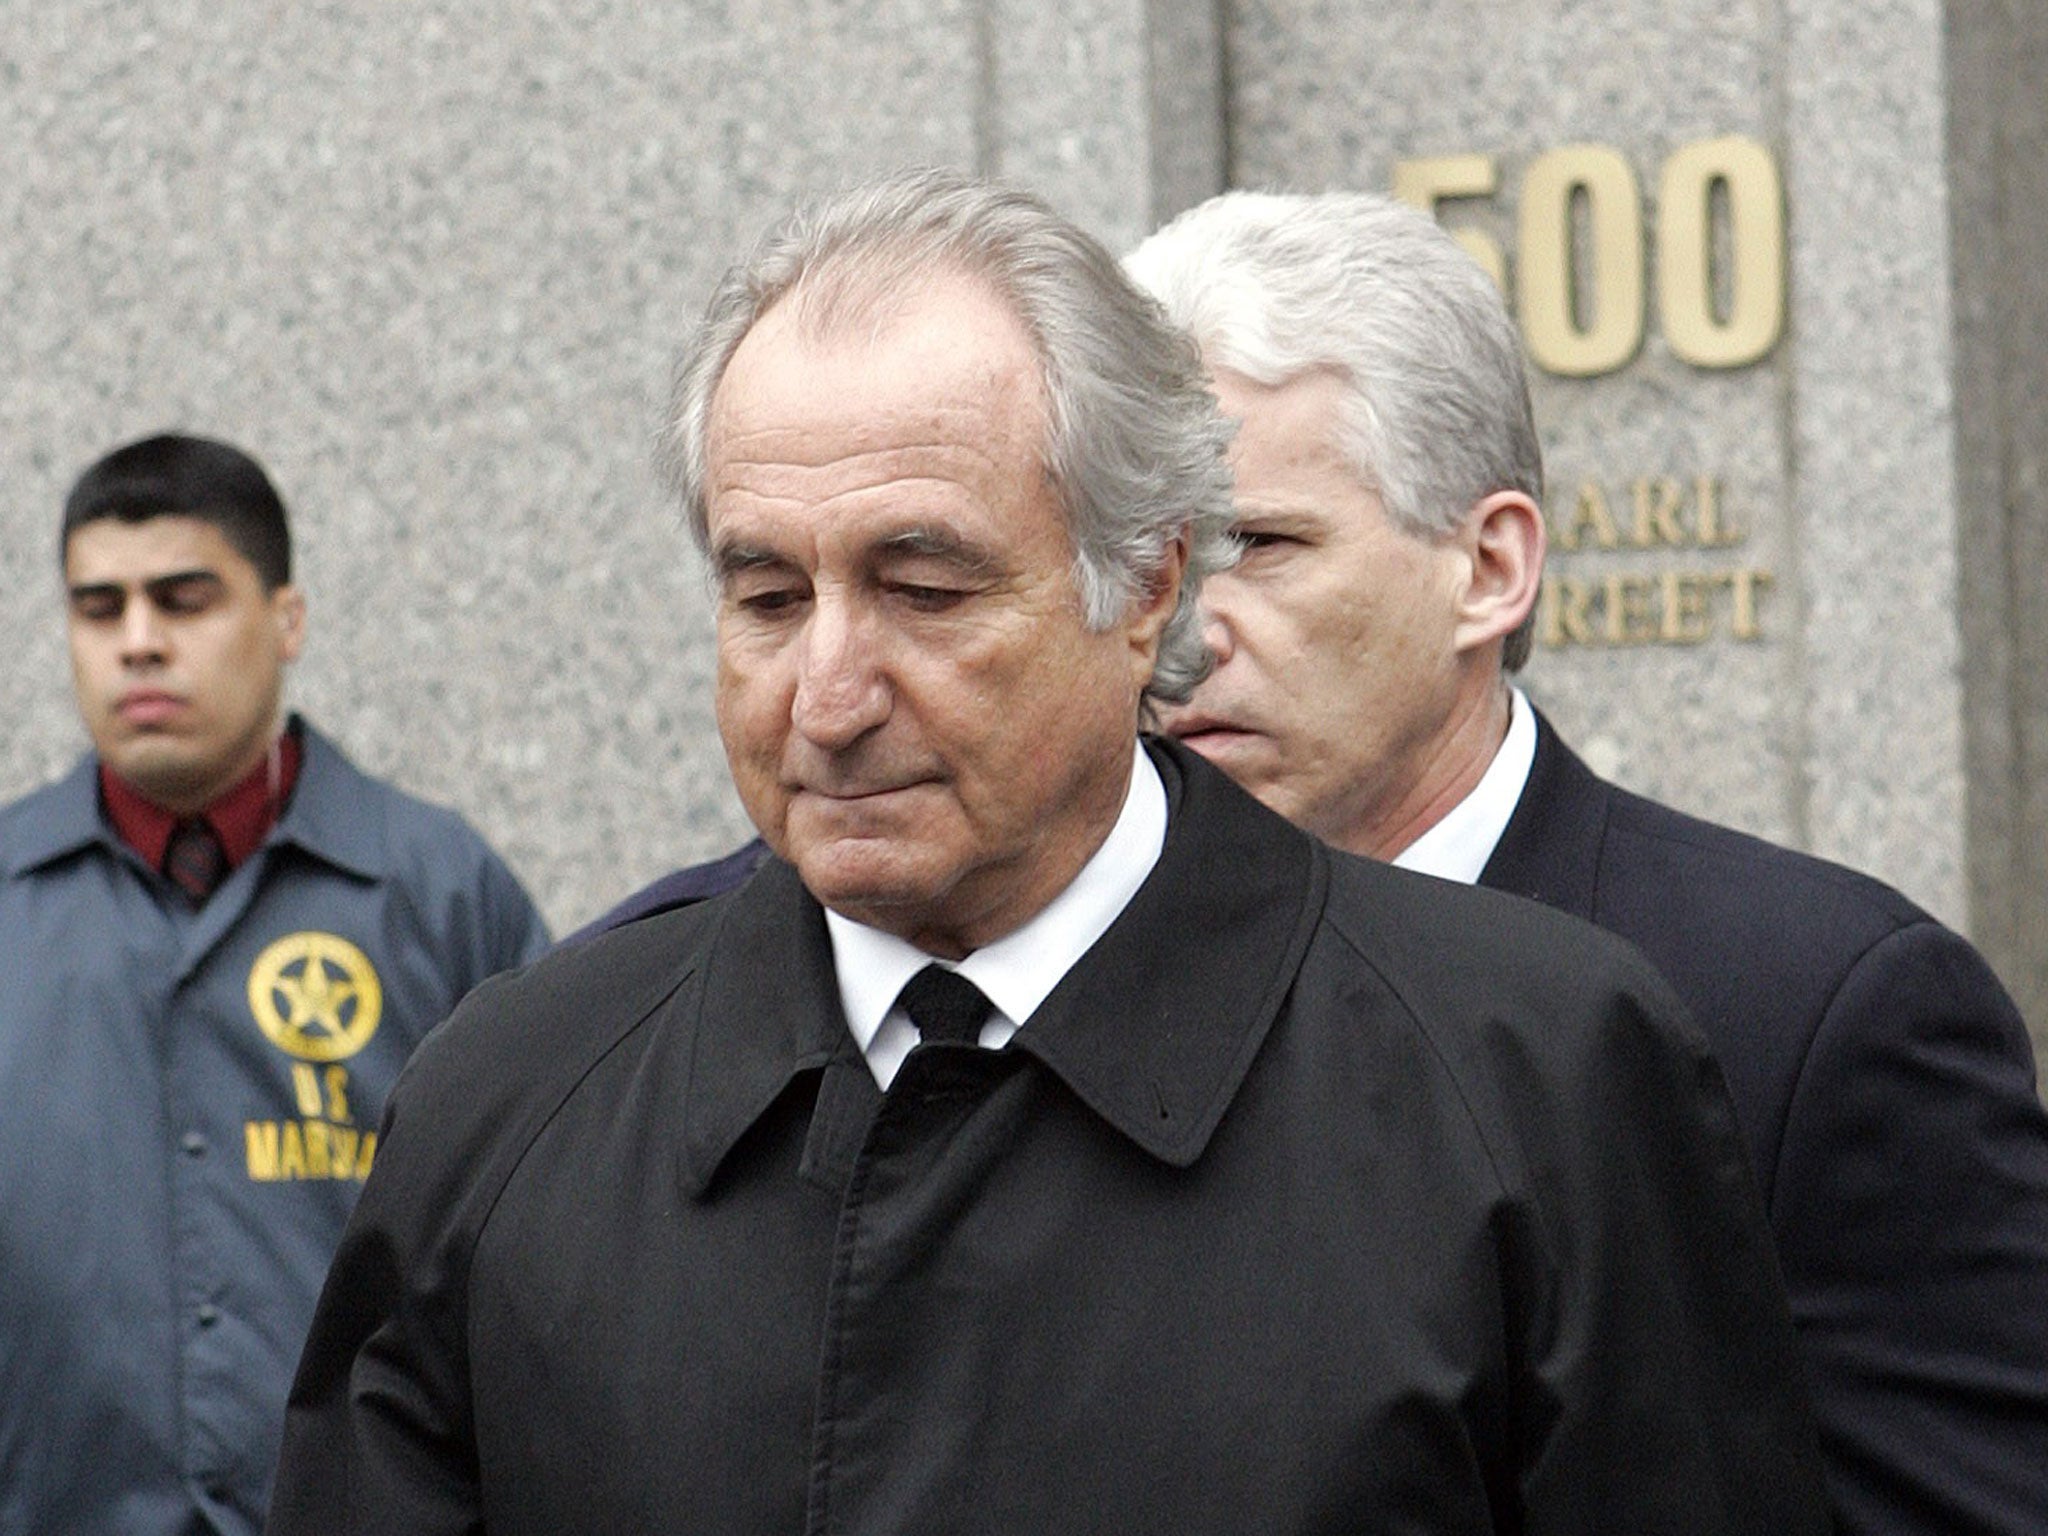 Prosecutors claim Madoff enlisted the help of Joann Crupi to make up trading records